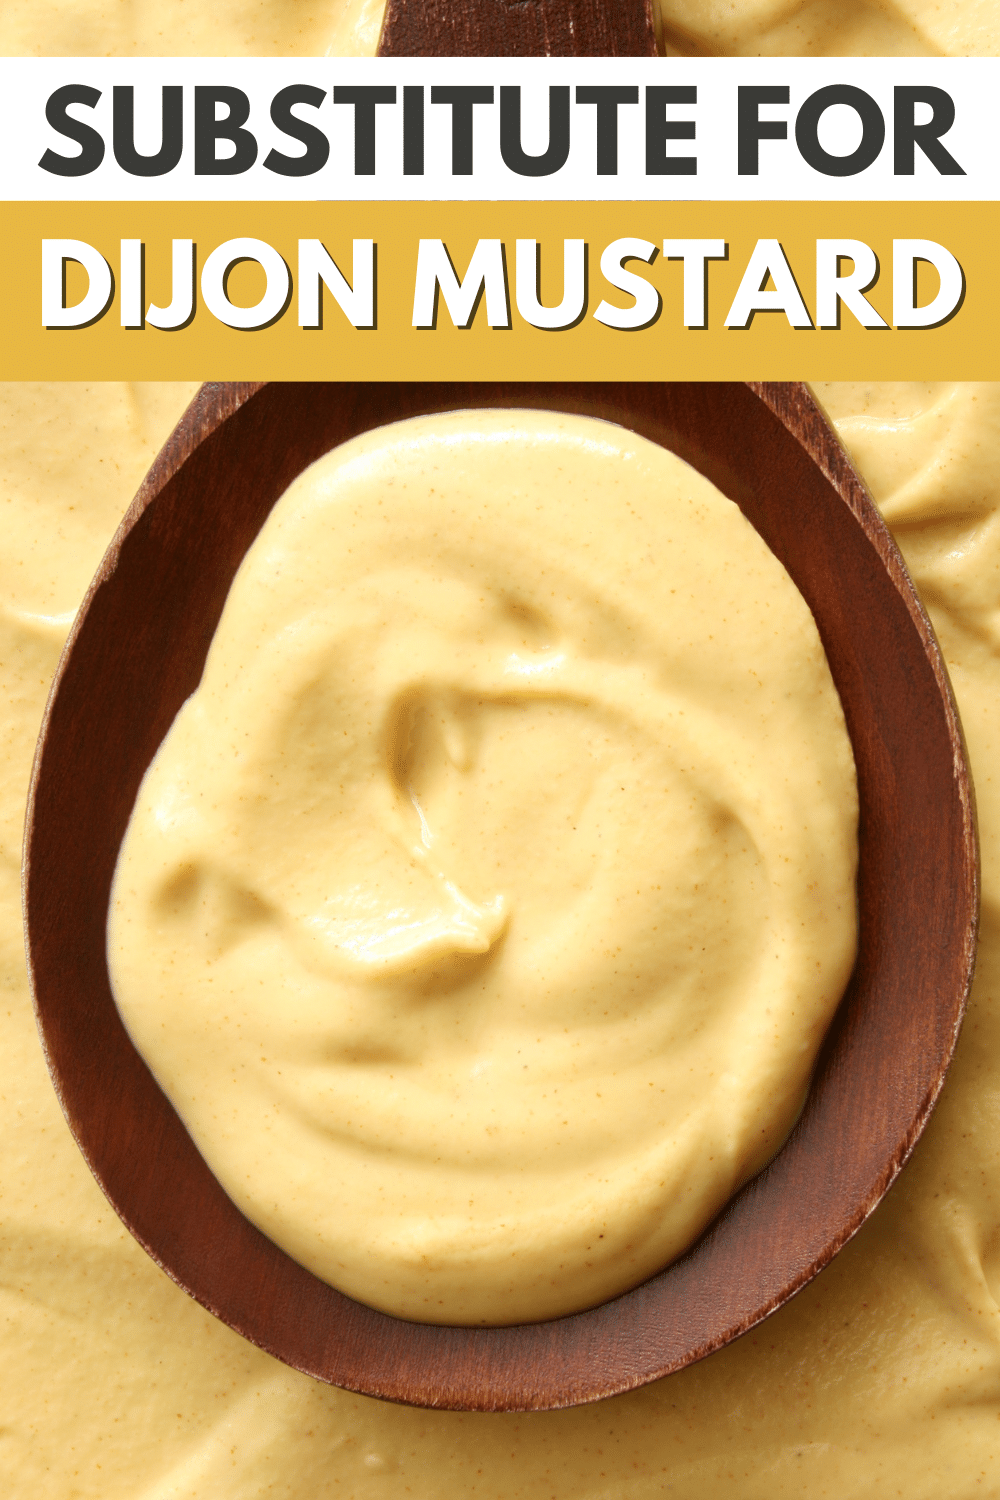 A spoonful of mustard, the perfect substitute for dijon mustard.